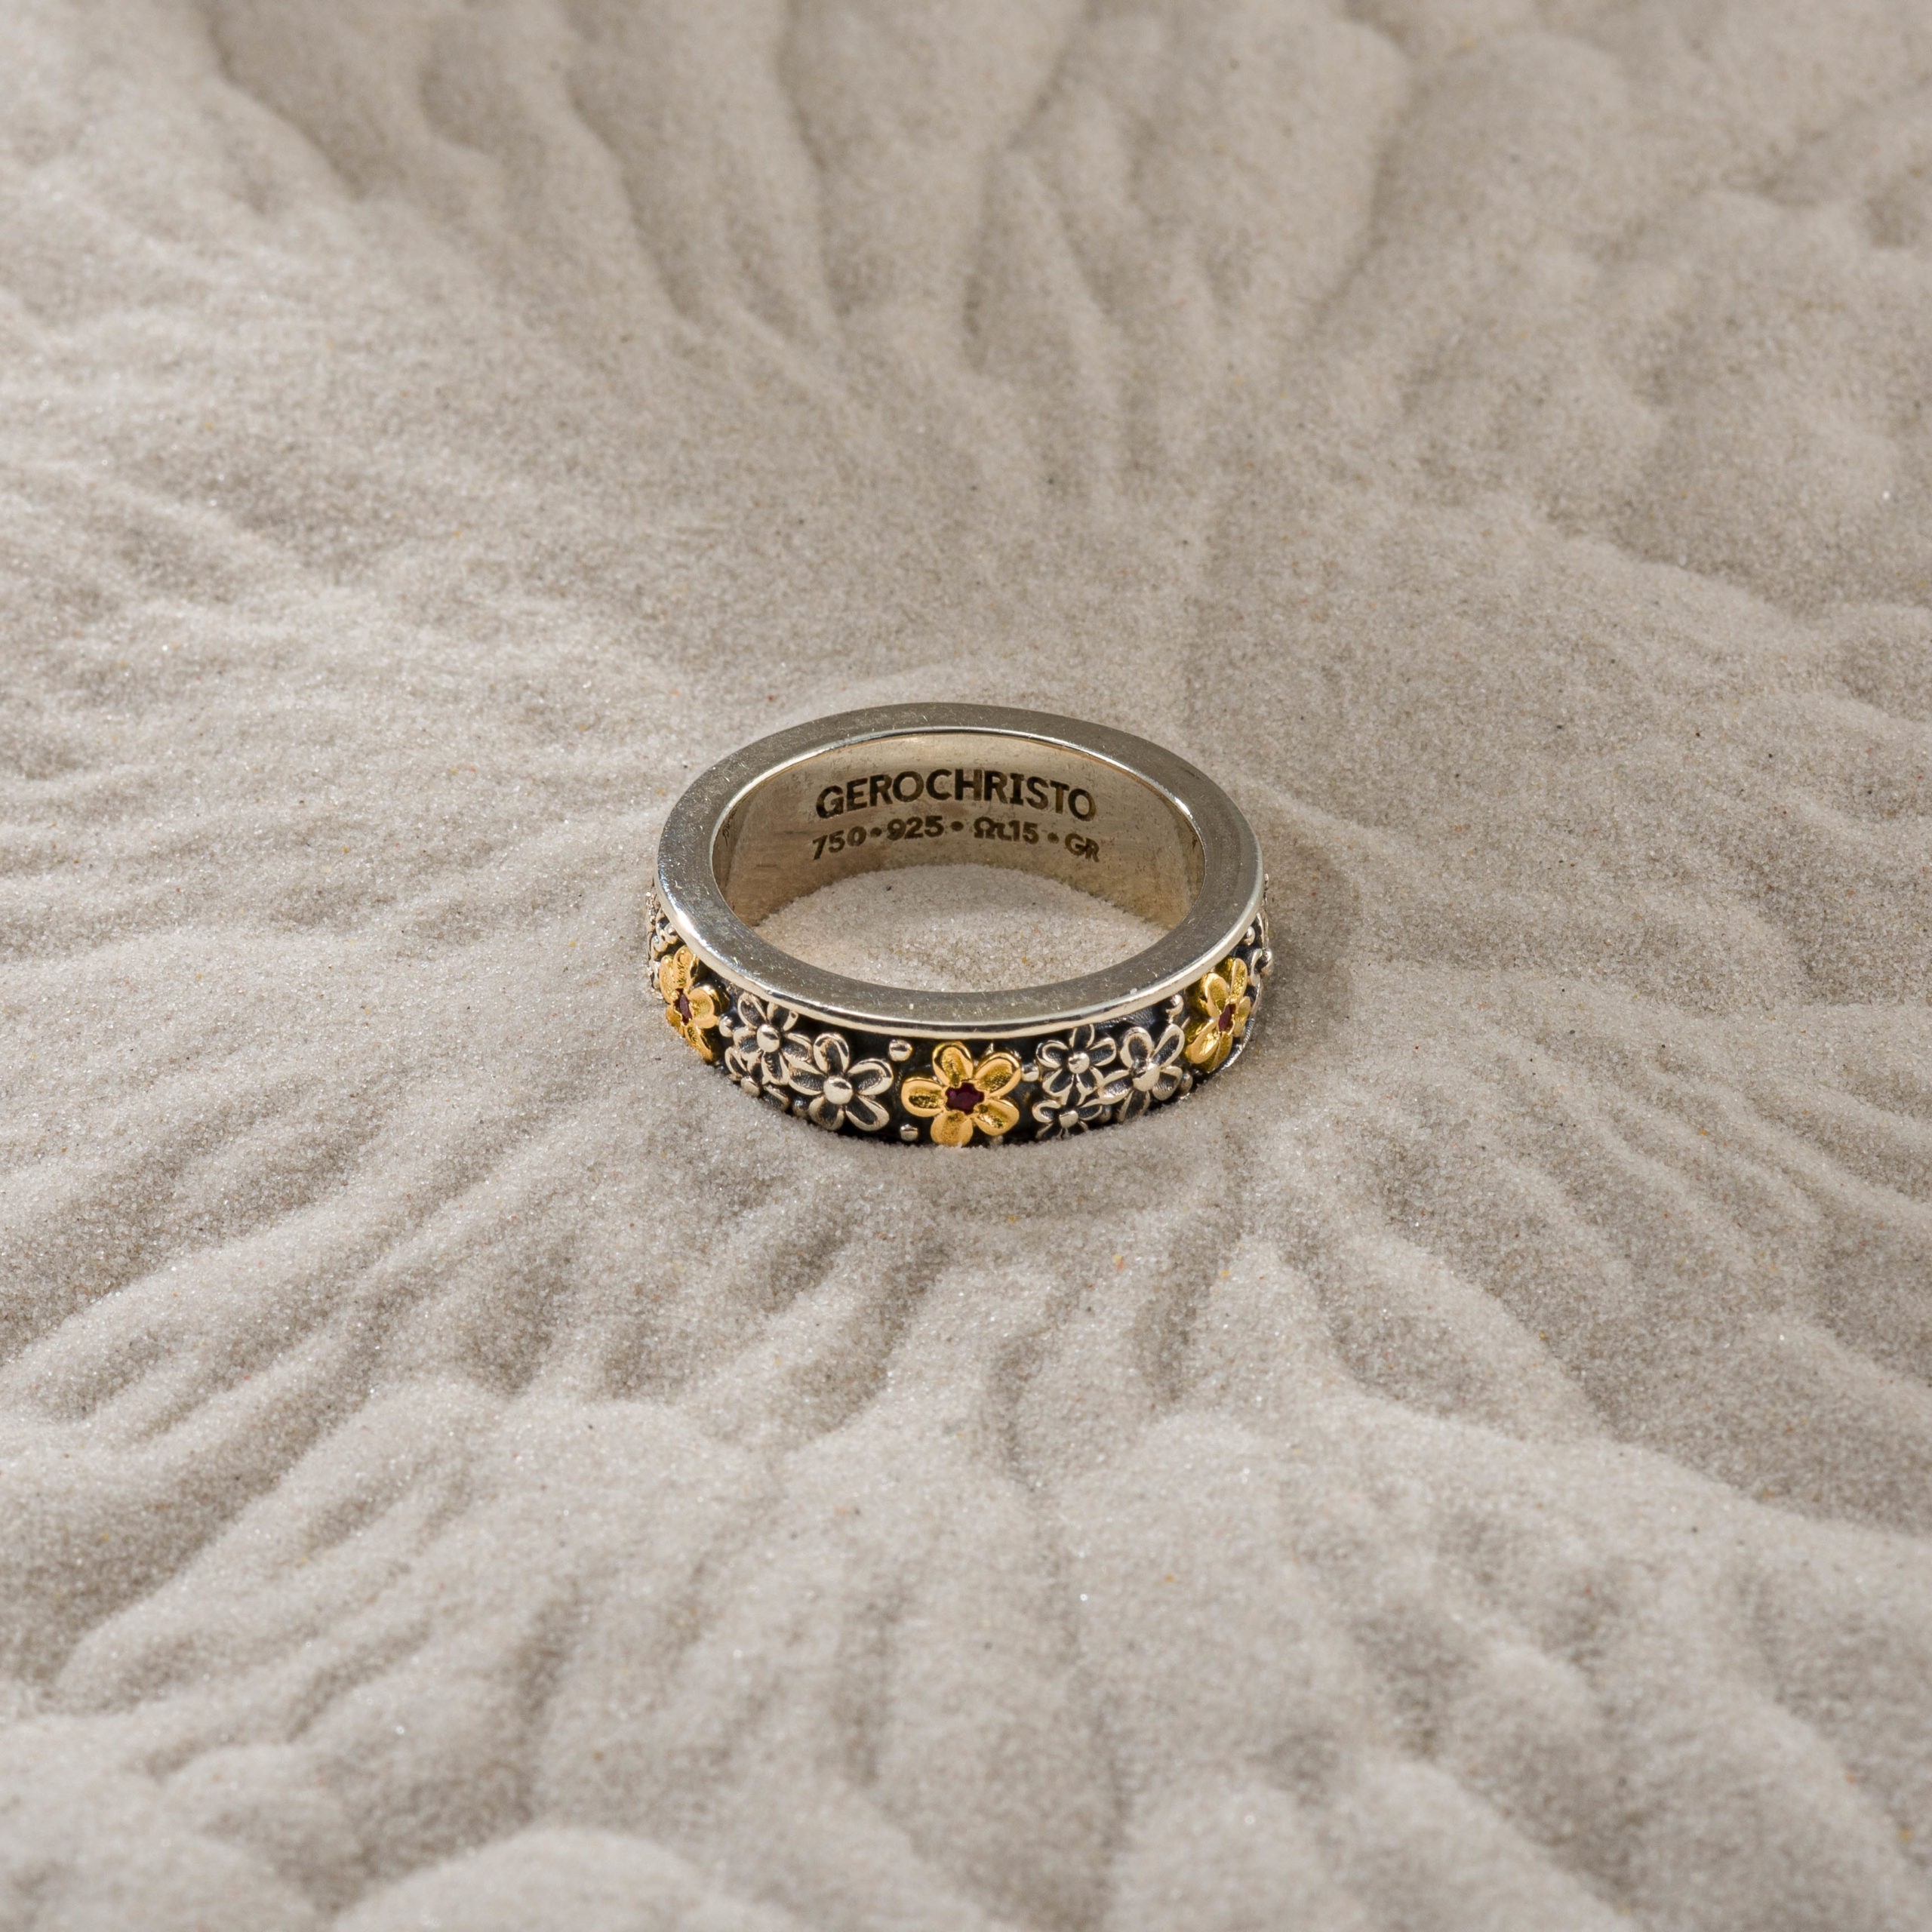 Wild Flowers Anthemis ring in sterling silver with 18K solid Yellow Gold and precious stones